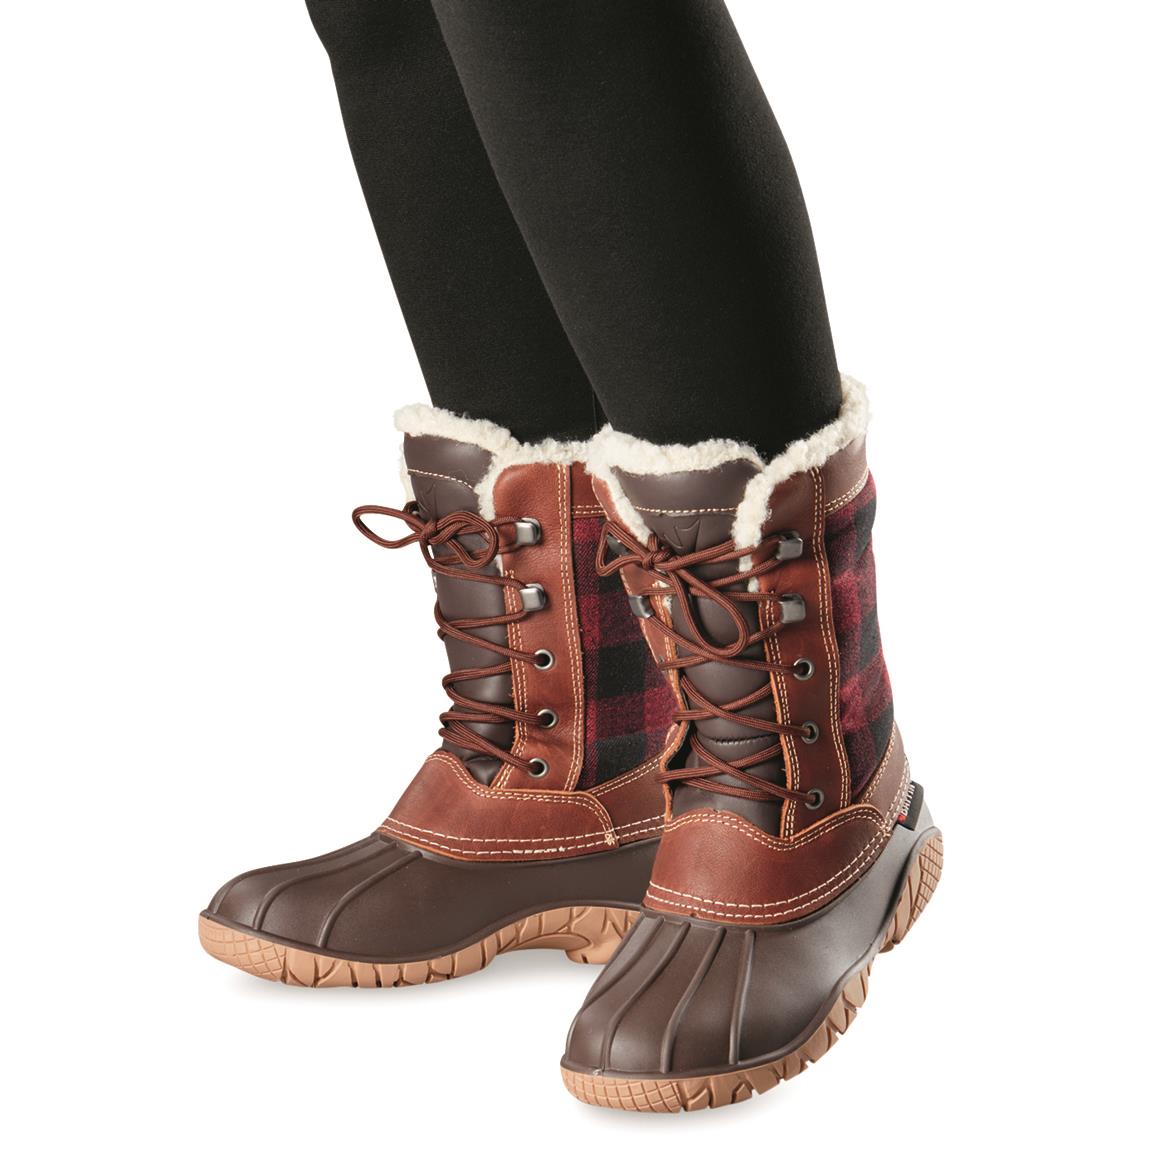 Ariat Women's Codie Boots - 733061, Casual Shoes at Sportsman's Guide